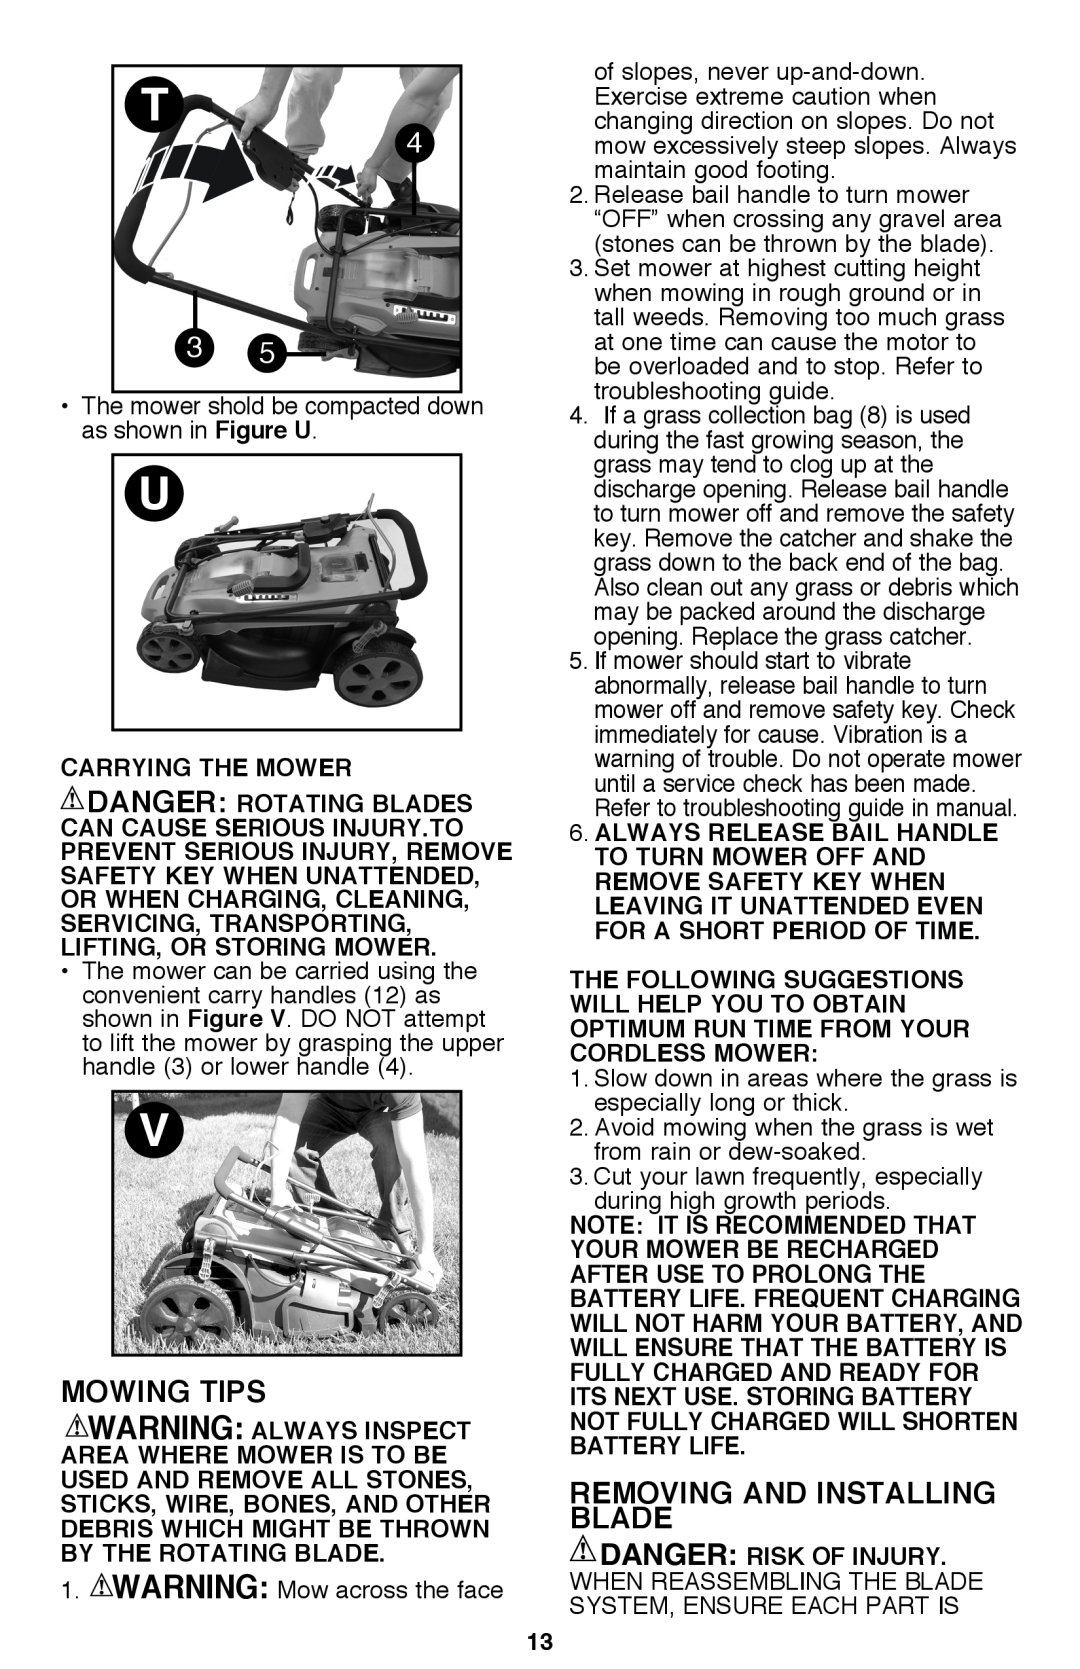 Black & Decker CM2040 instruction manual Mowing Tips, Removing And Installing Blade 